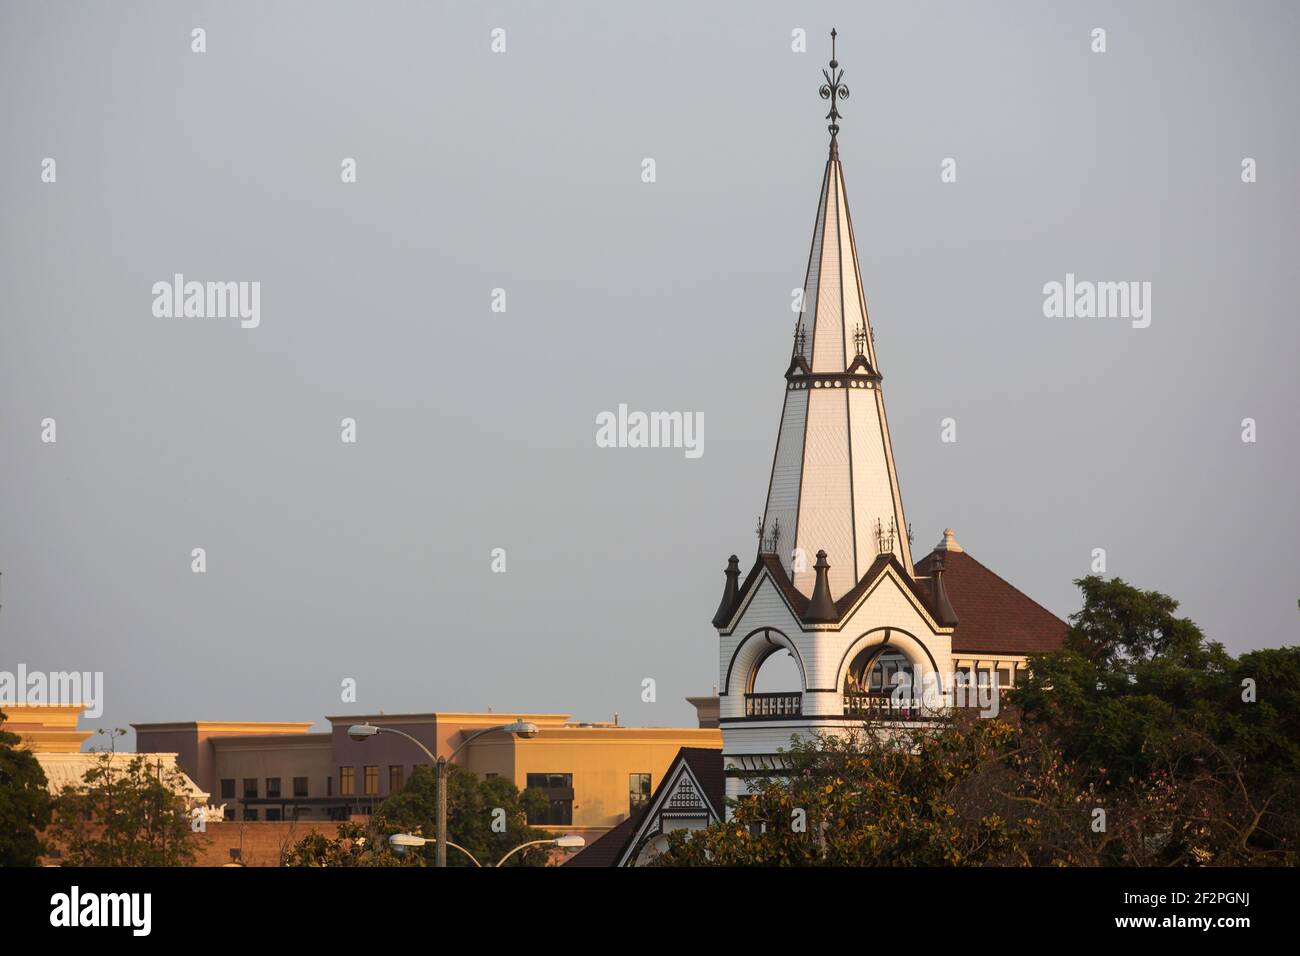 Aerial afternoon view of the historic religious center of downtown Pomona, California, USA. Stock Photo